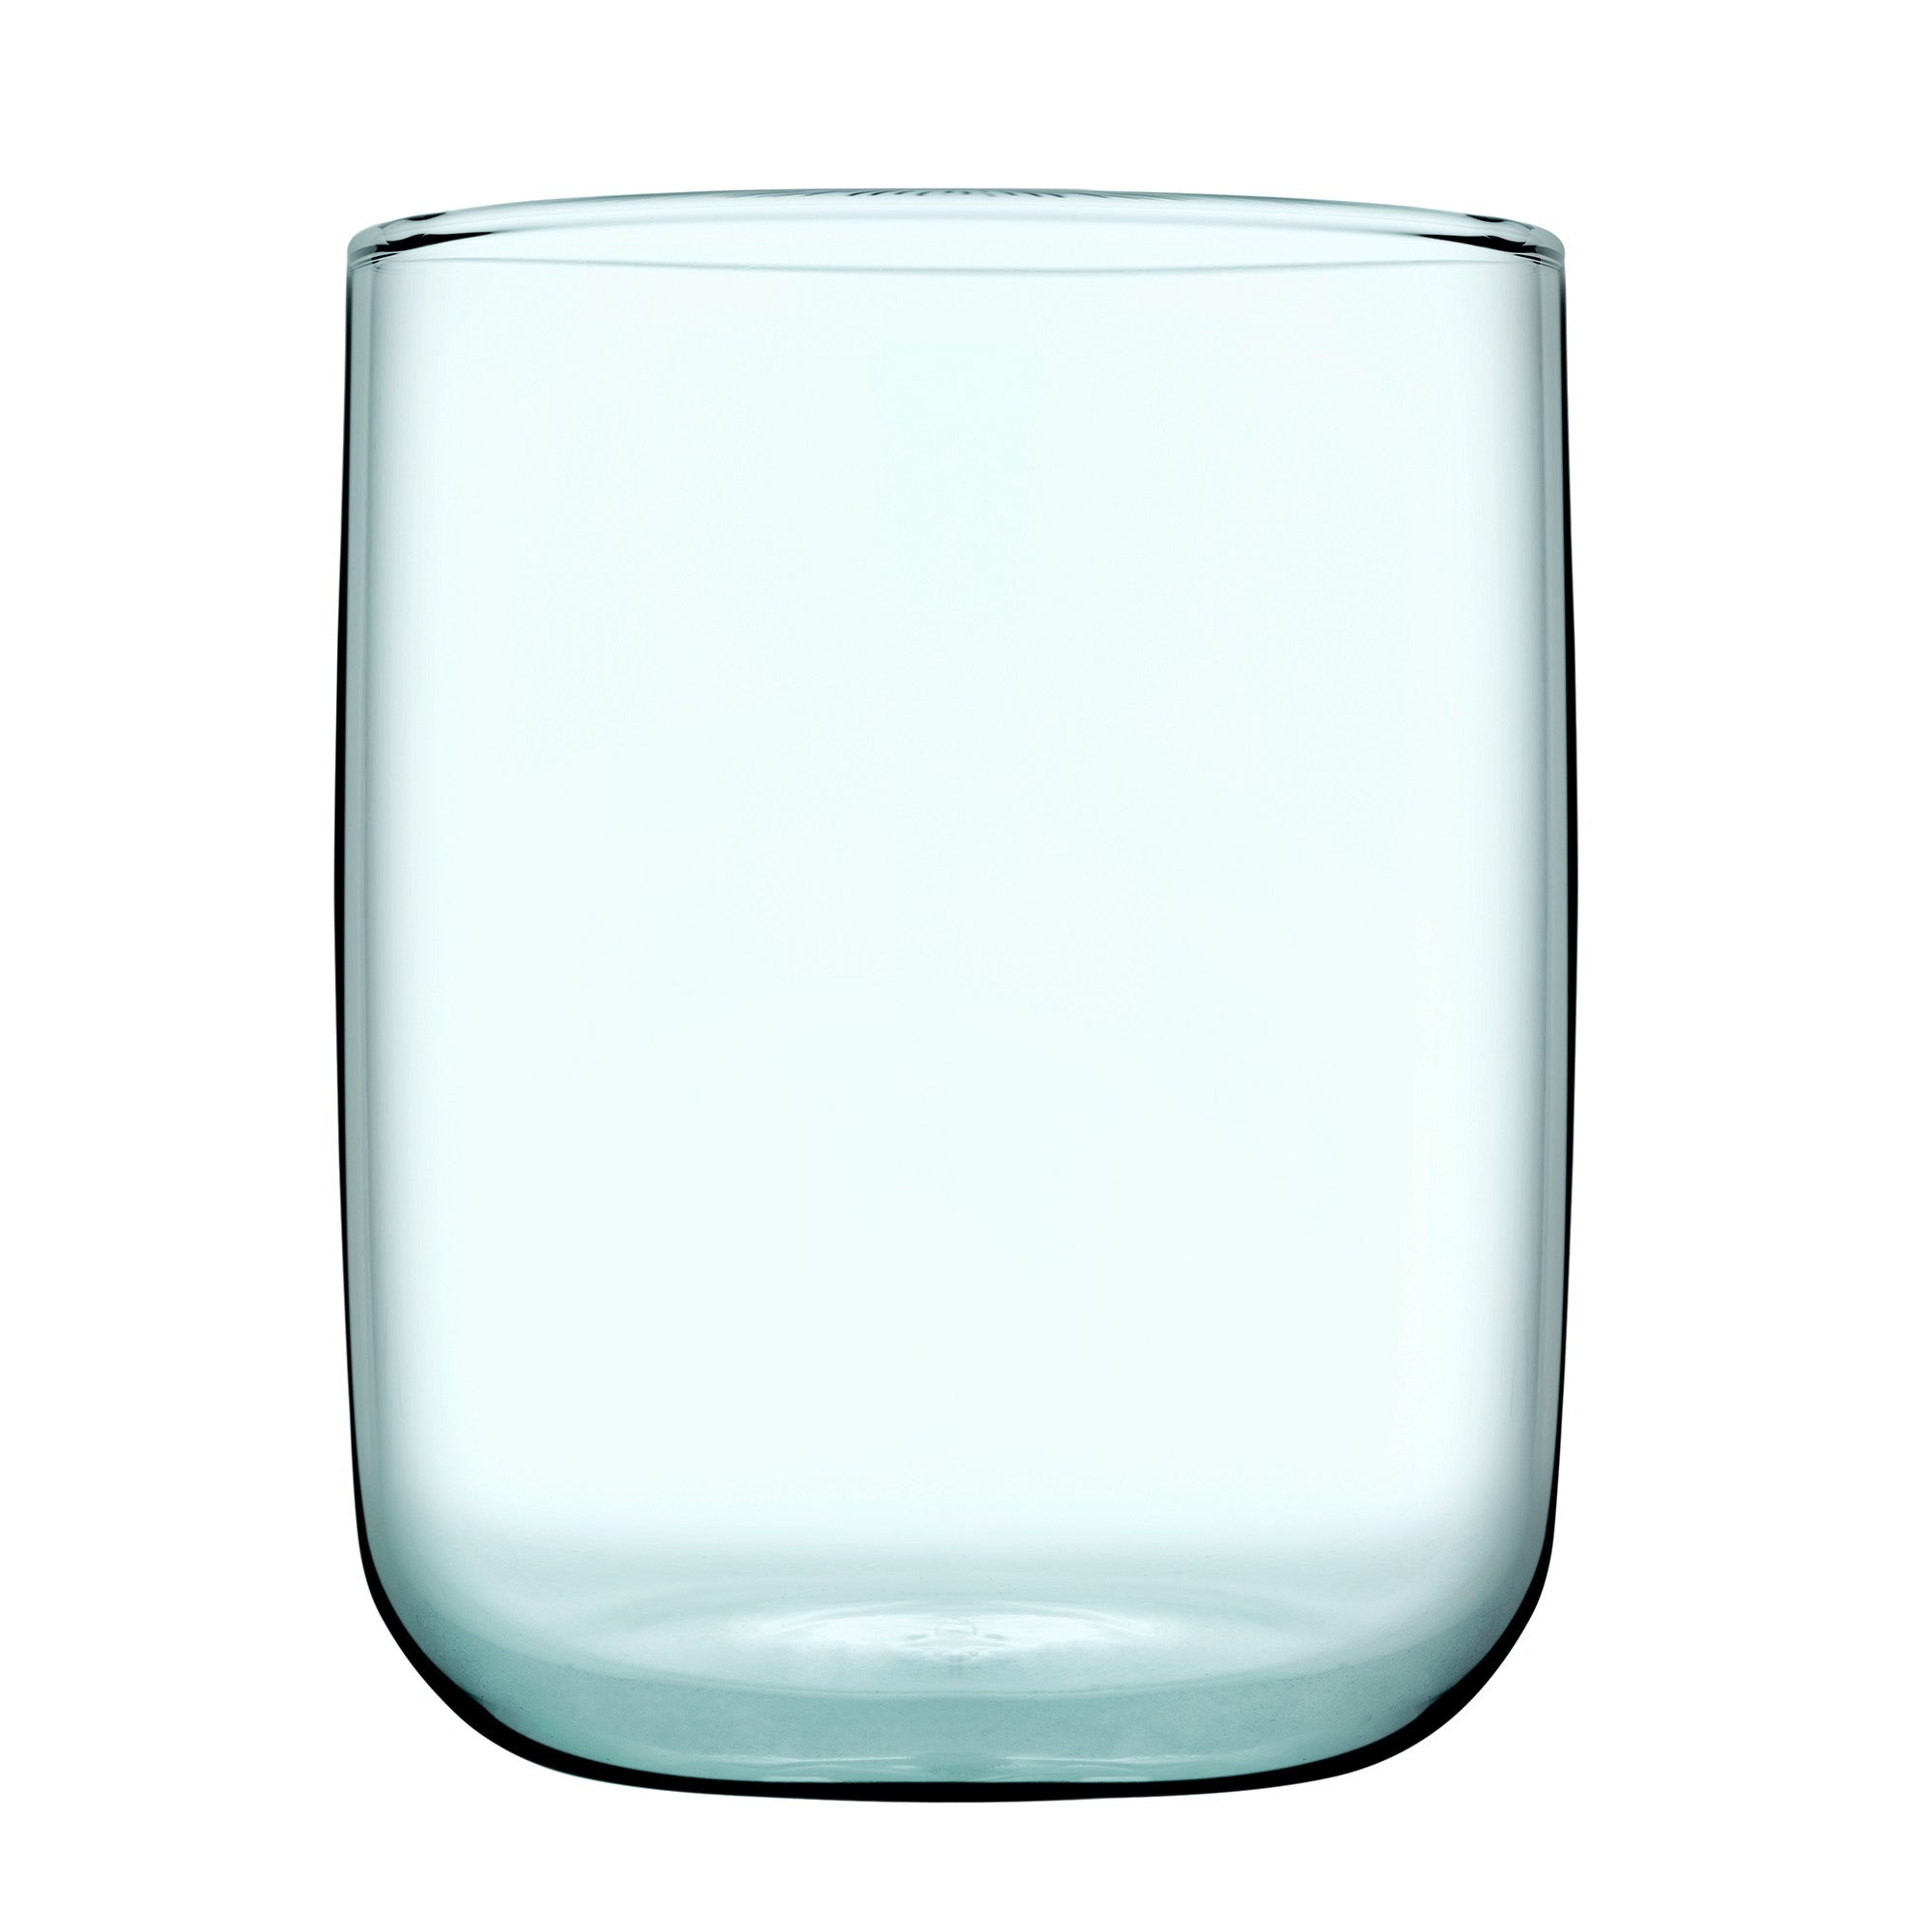 title:Safdie & Co. Aware Iconic Old Fashion 4PC Set 280ML Recycled Glass;color:Transparent